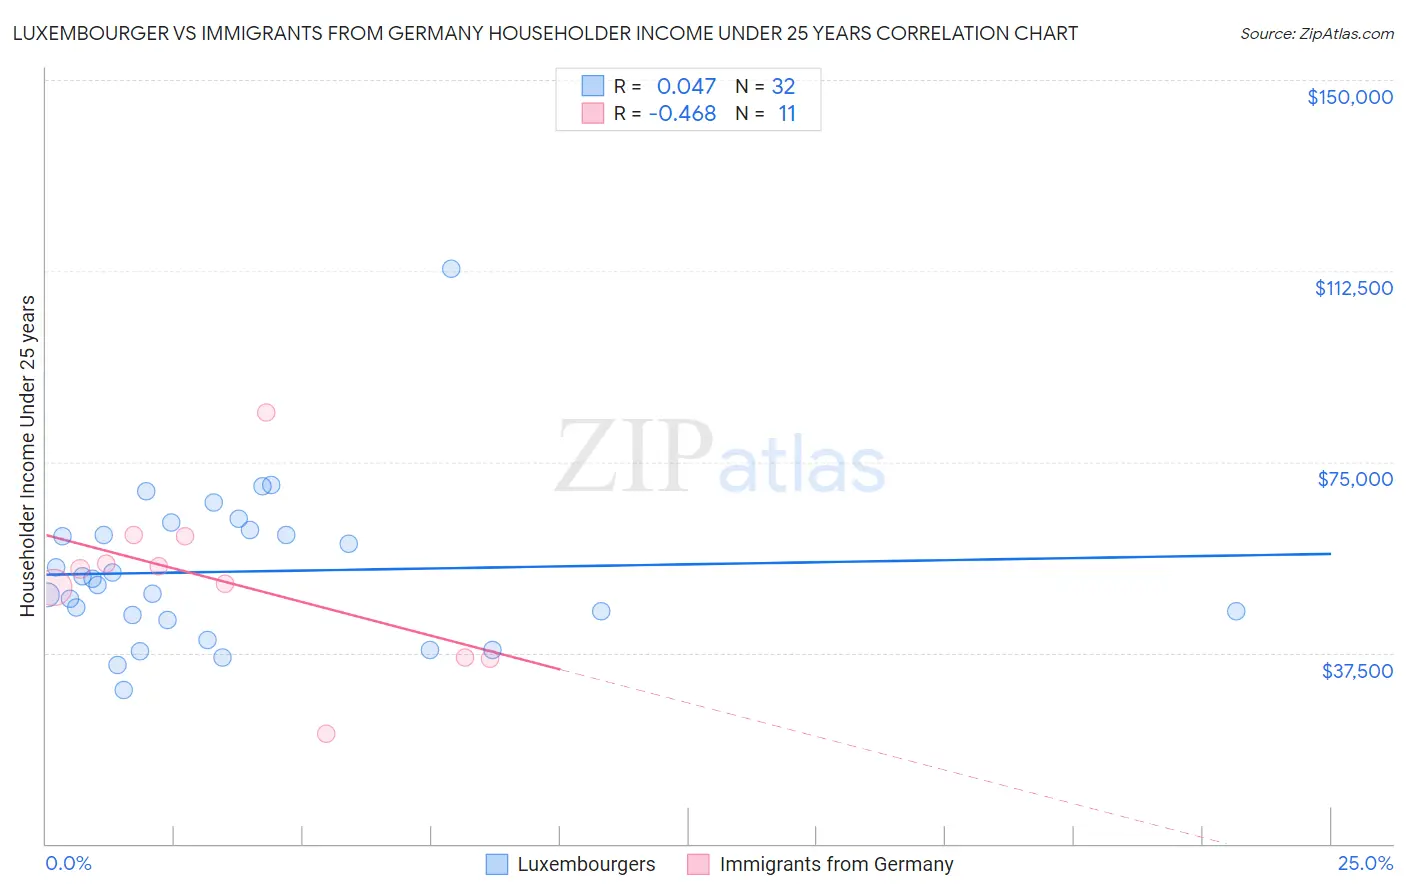 Luxembourger vs Immigrants from Germany Householder Income Under 25 years